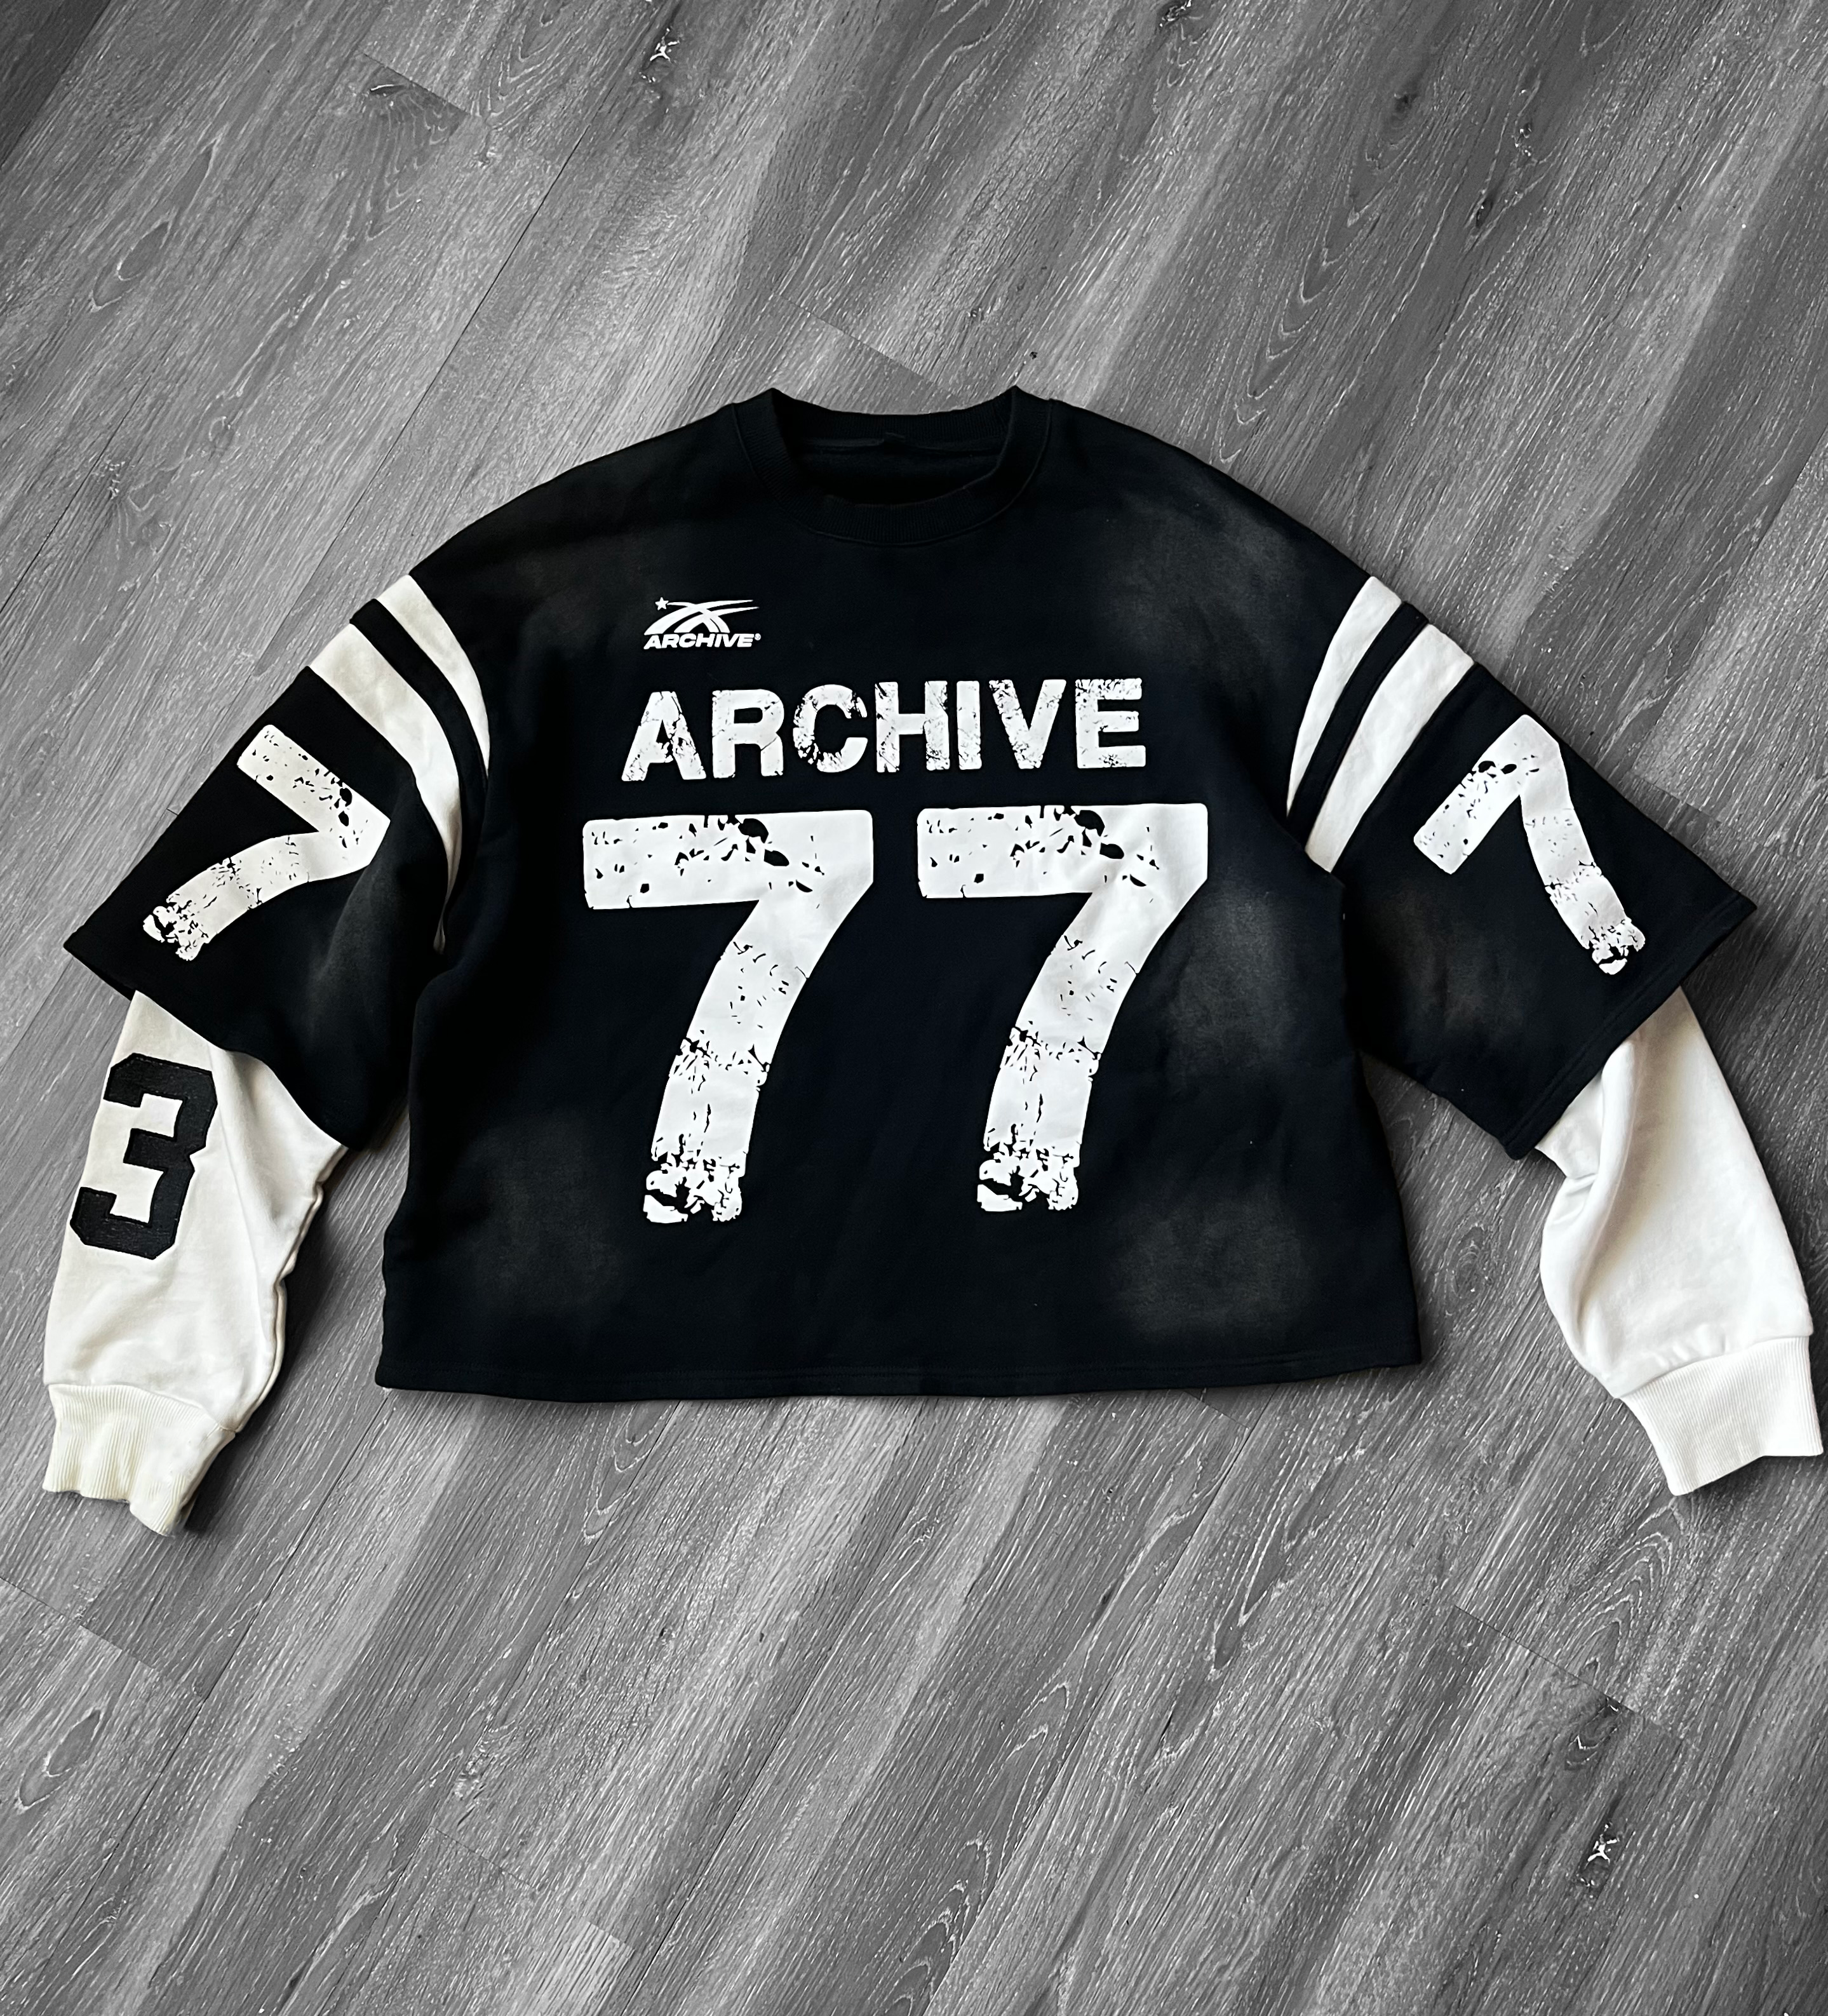 ARCHIVE #77 BLACK DOUBLE SLEEVED SHIRT